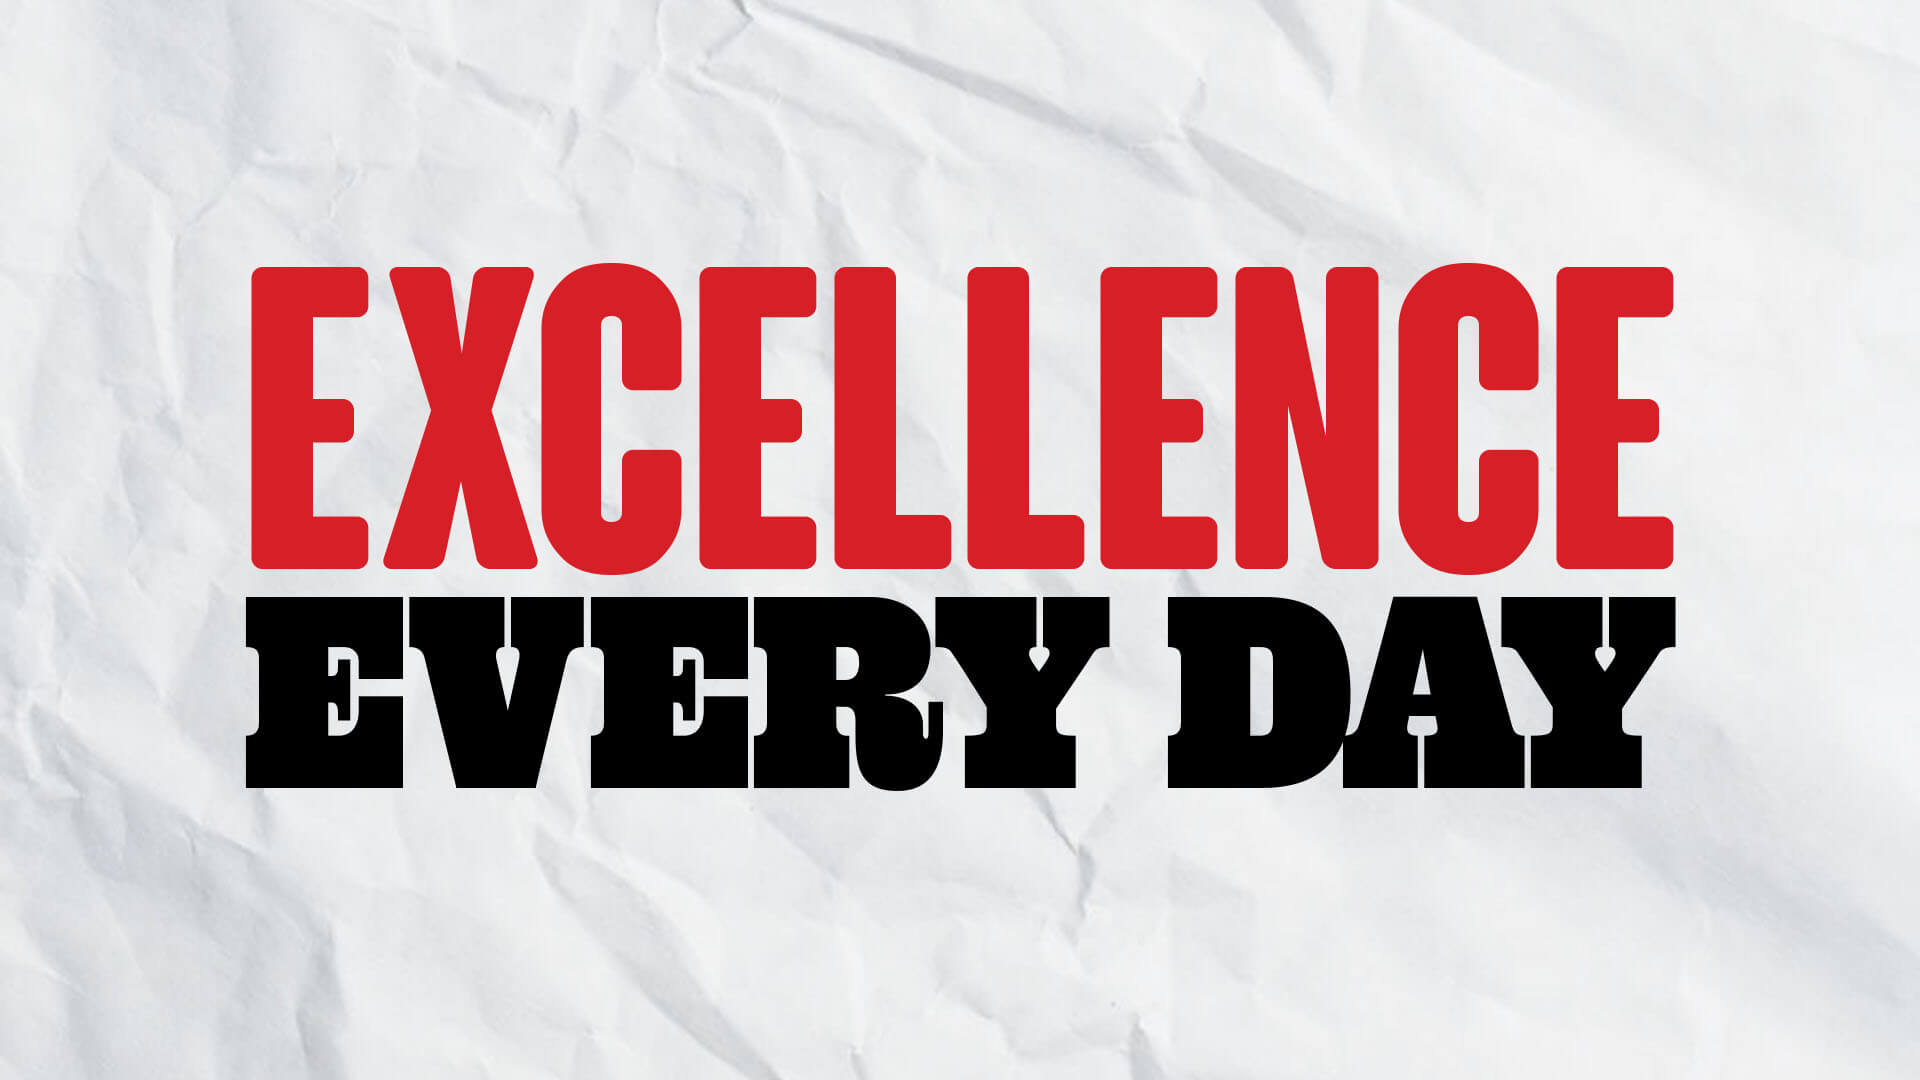 Excellence Everyday